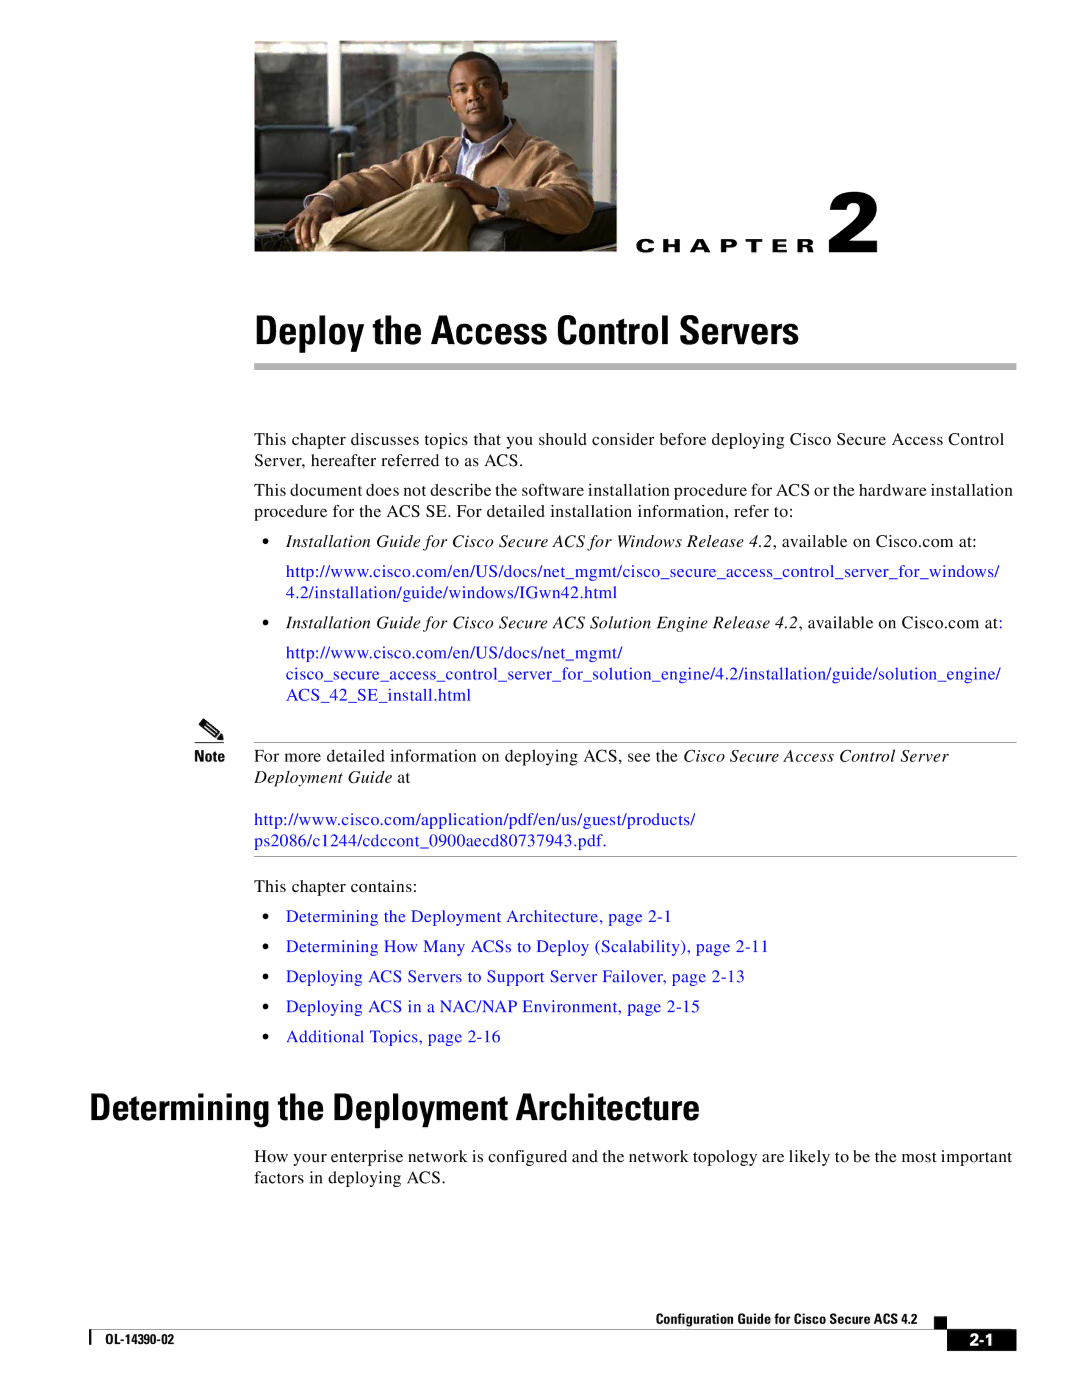 Cisco Systems 4.2 manual Deploy the Access Control Servers, Determining the Deployment Architecture 